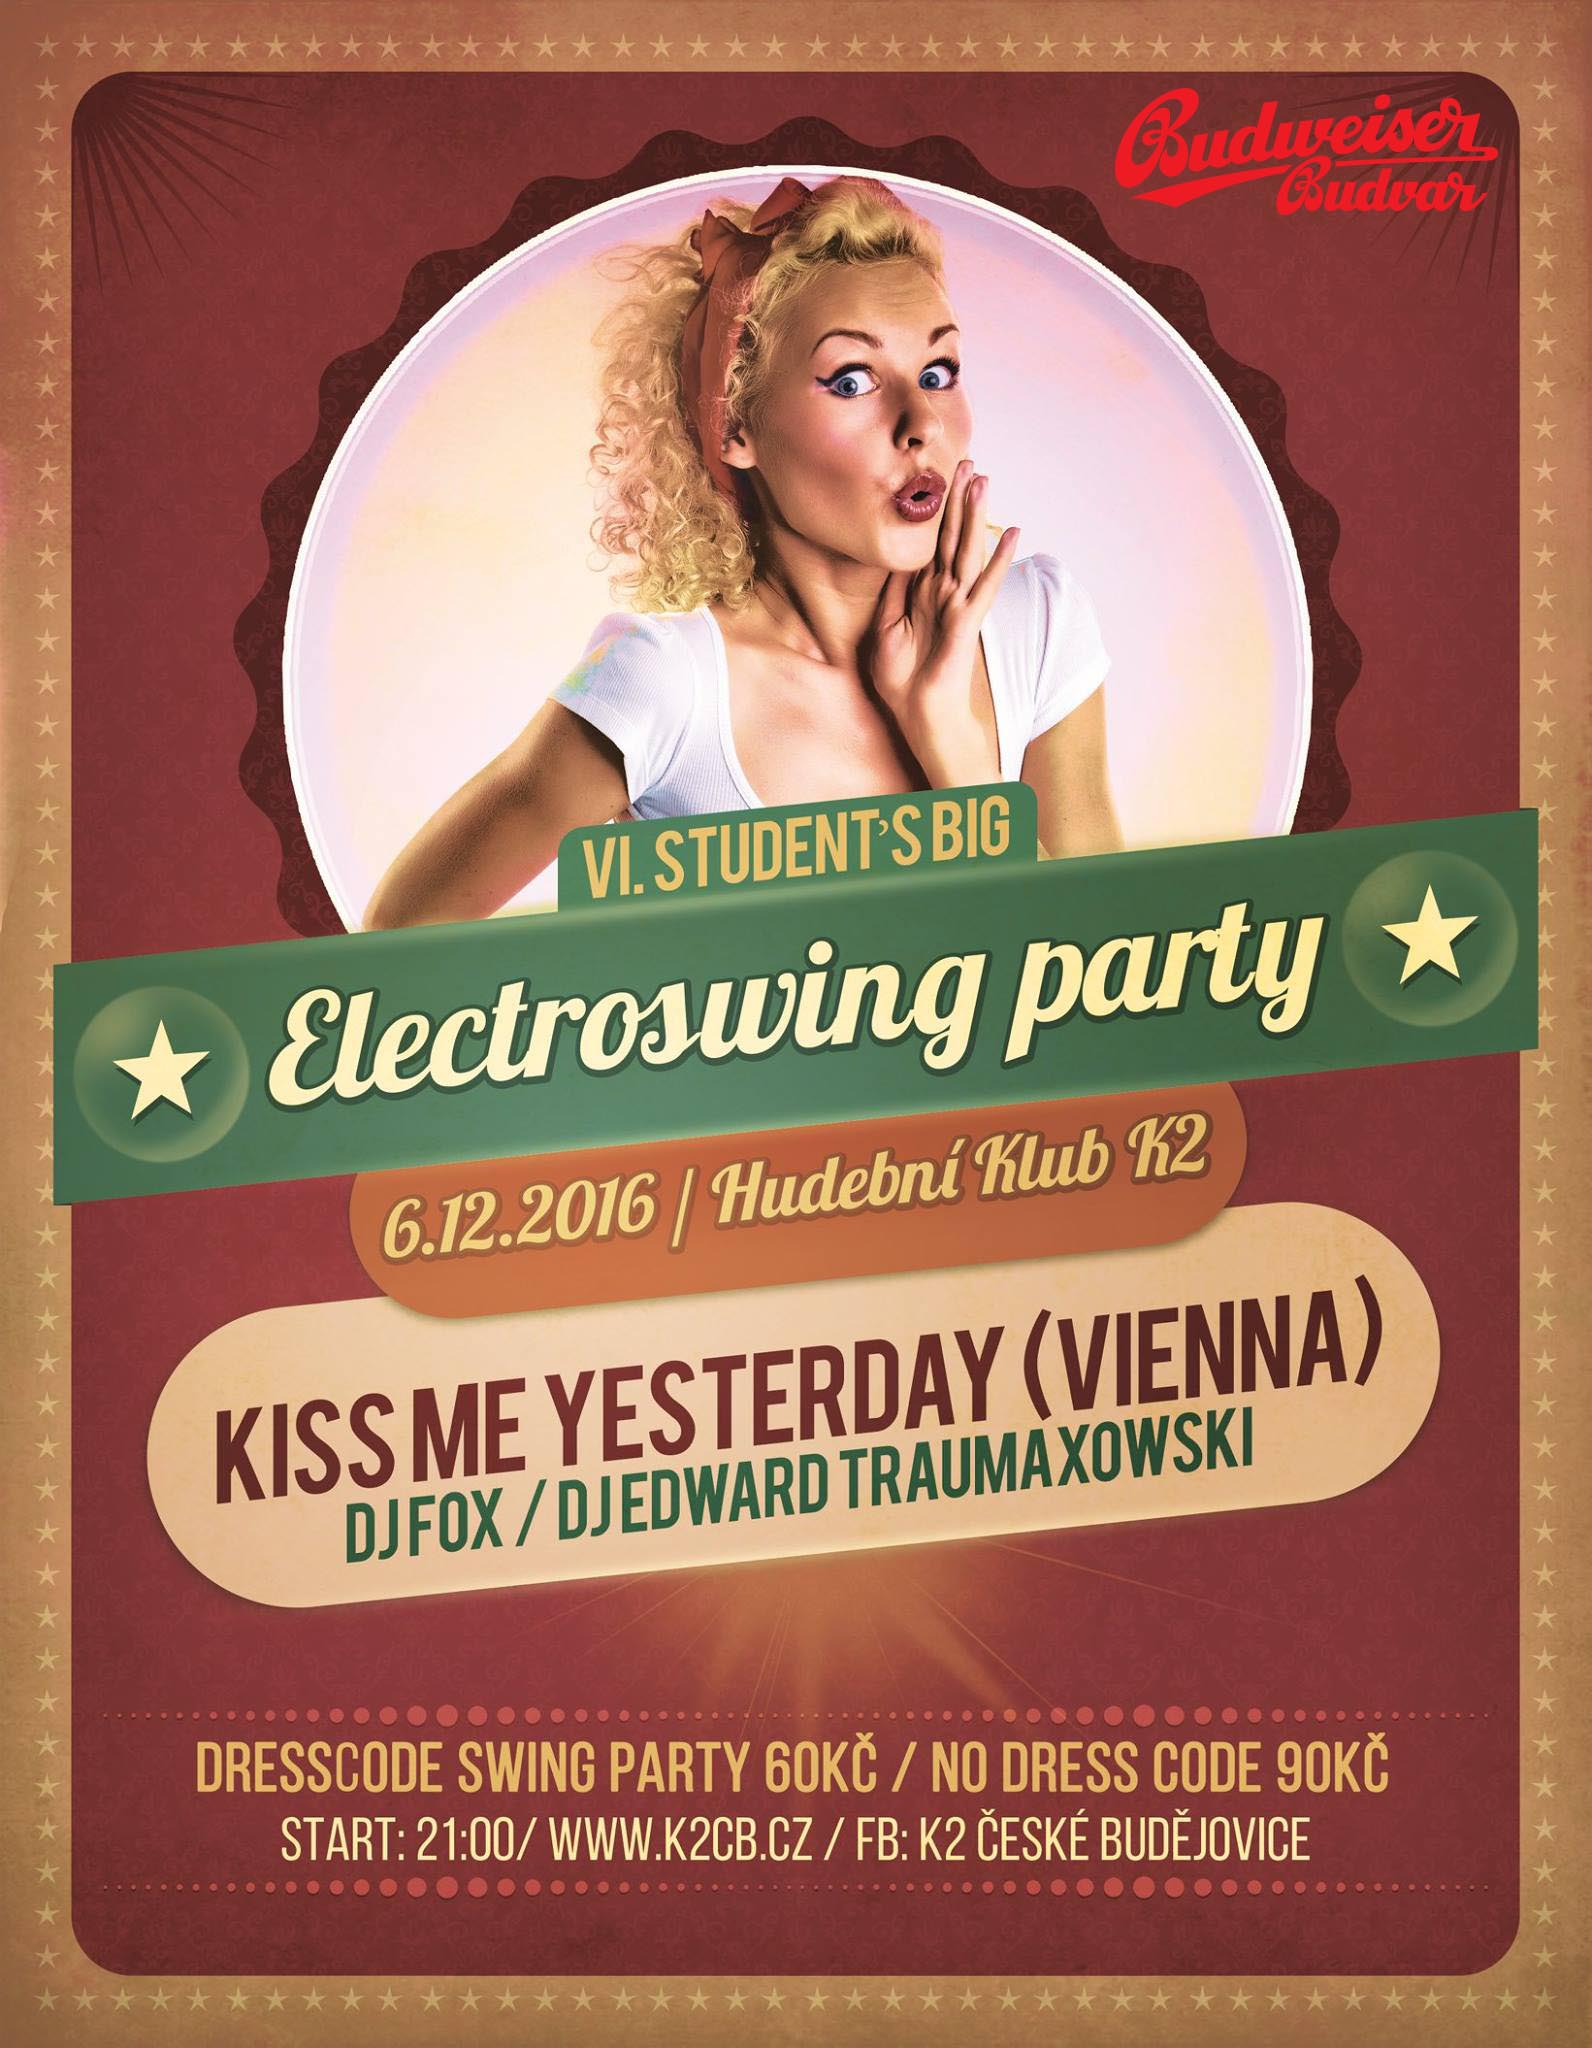 VI. Student's Big Electroswing party 